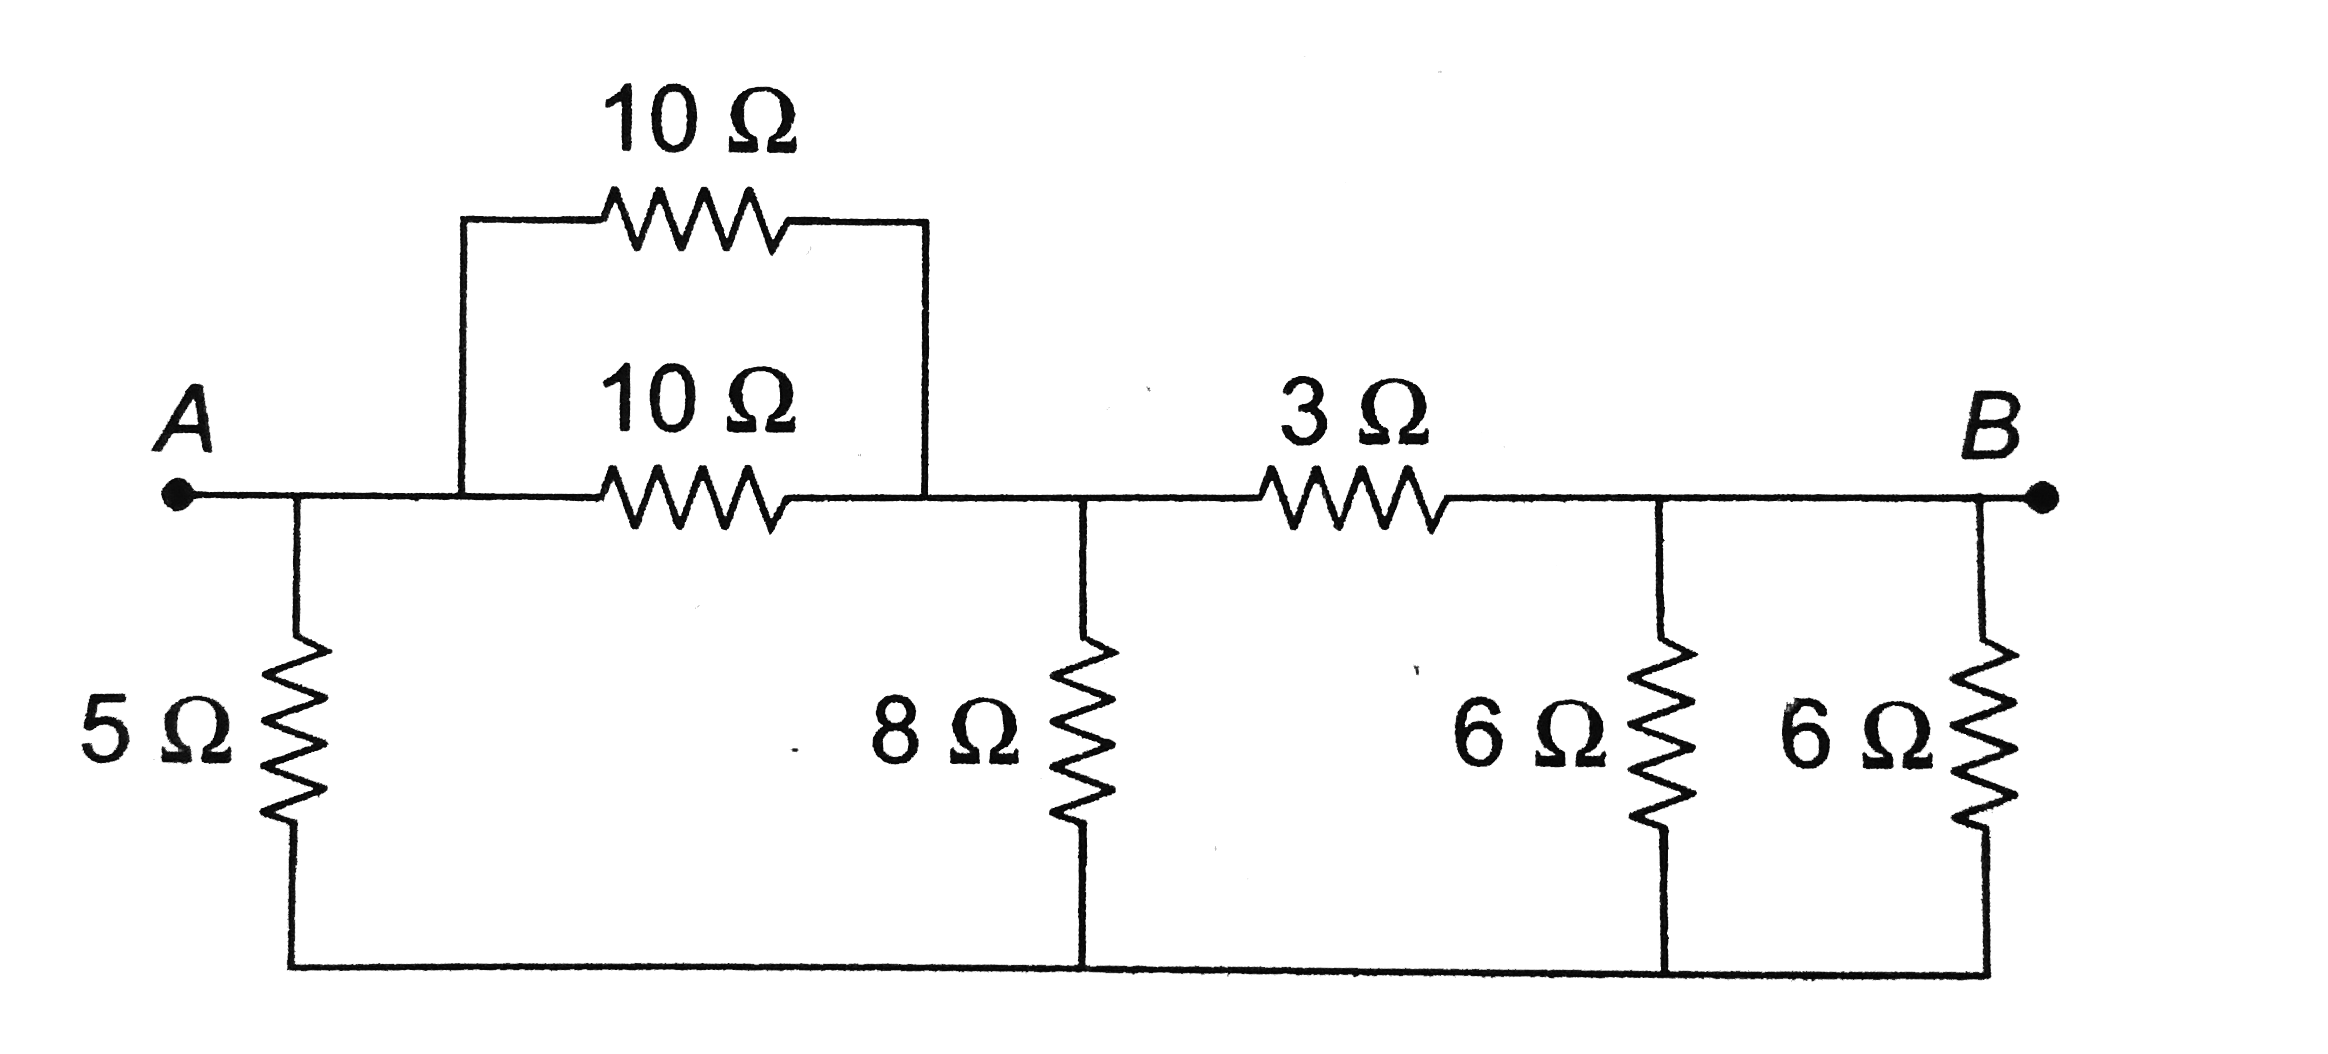 Seven resistance are connected as shown in the firgure. The equivalent resistance between A and B is